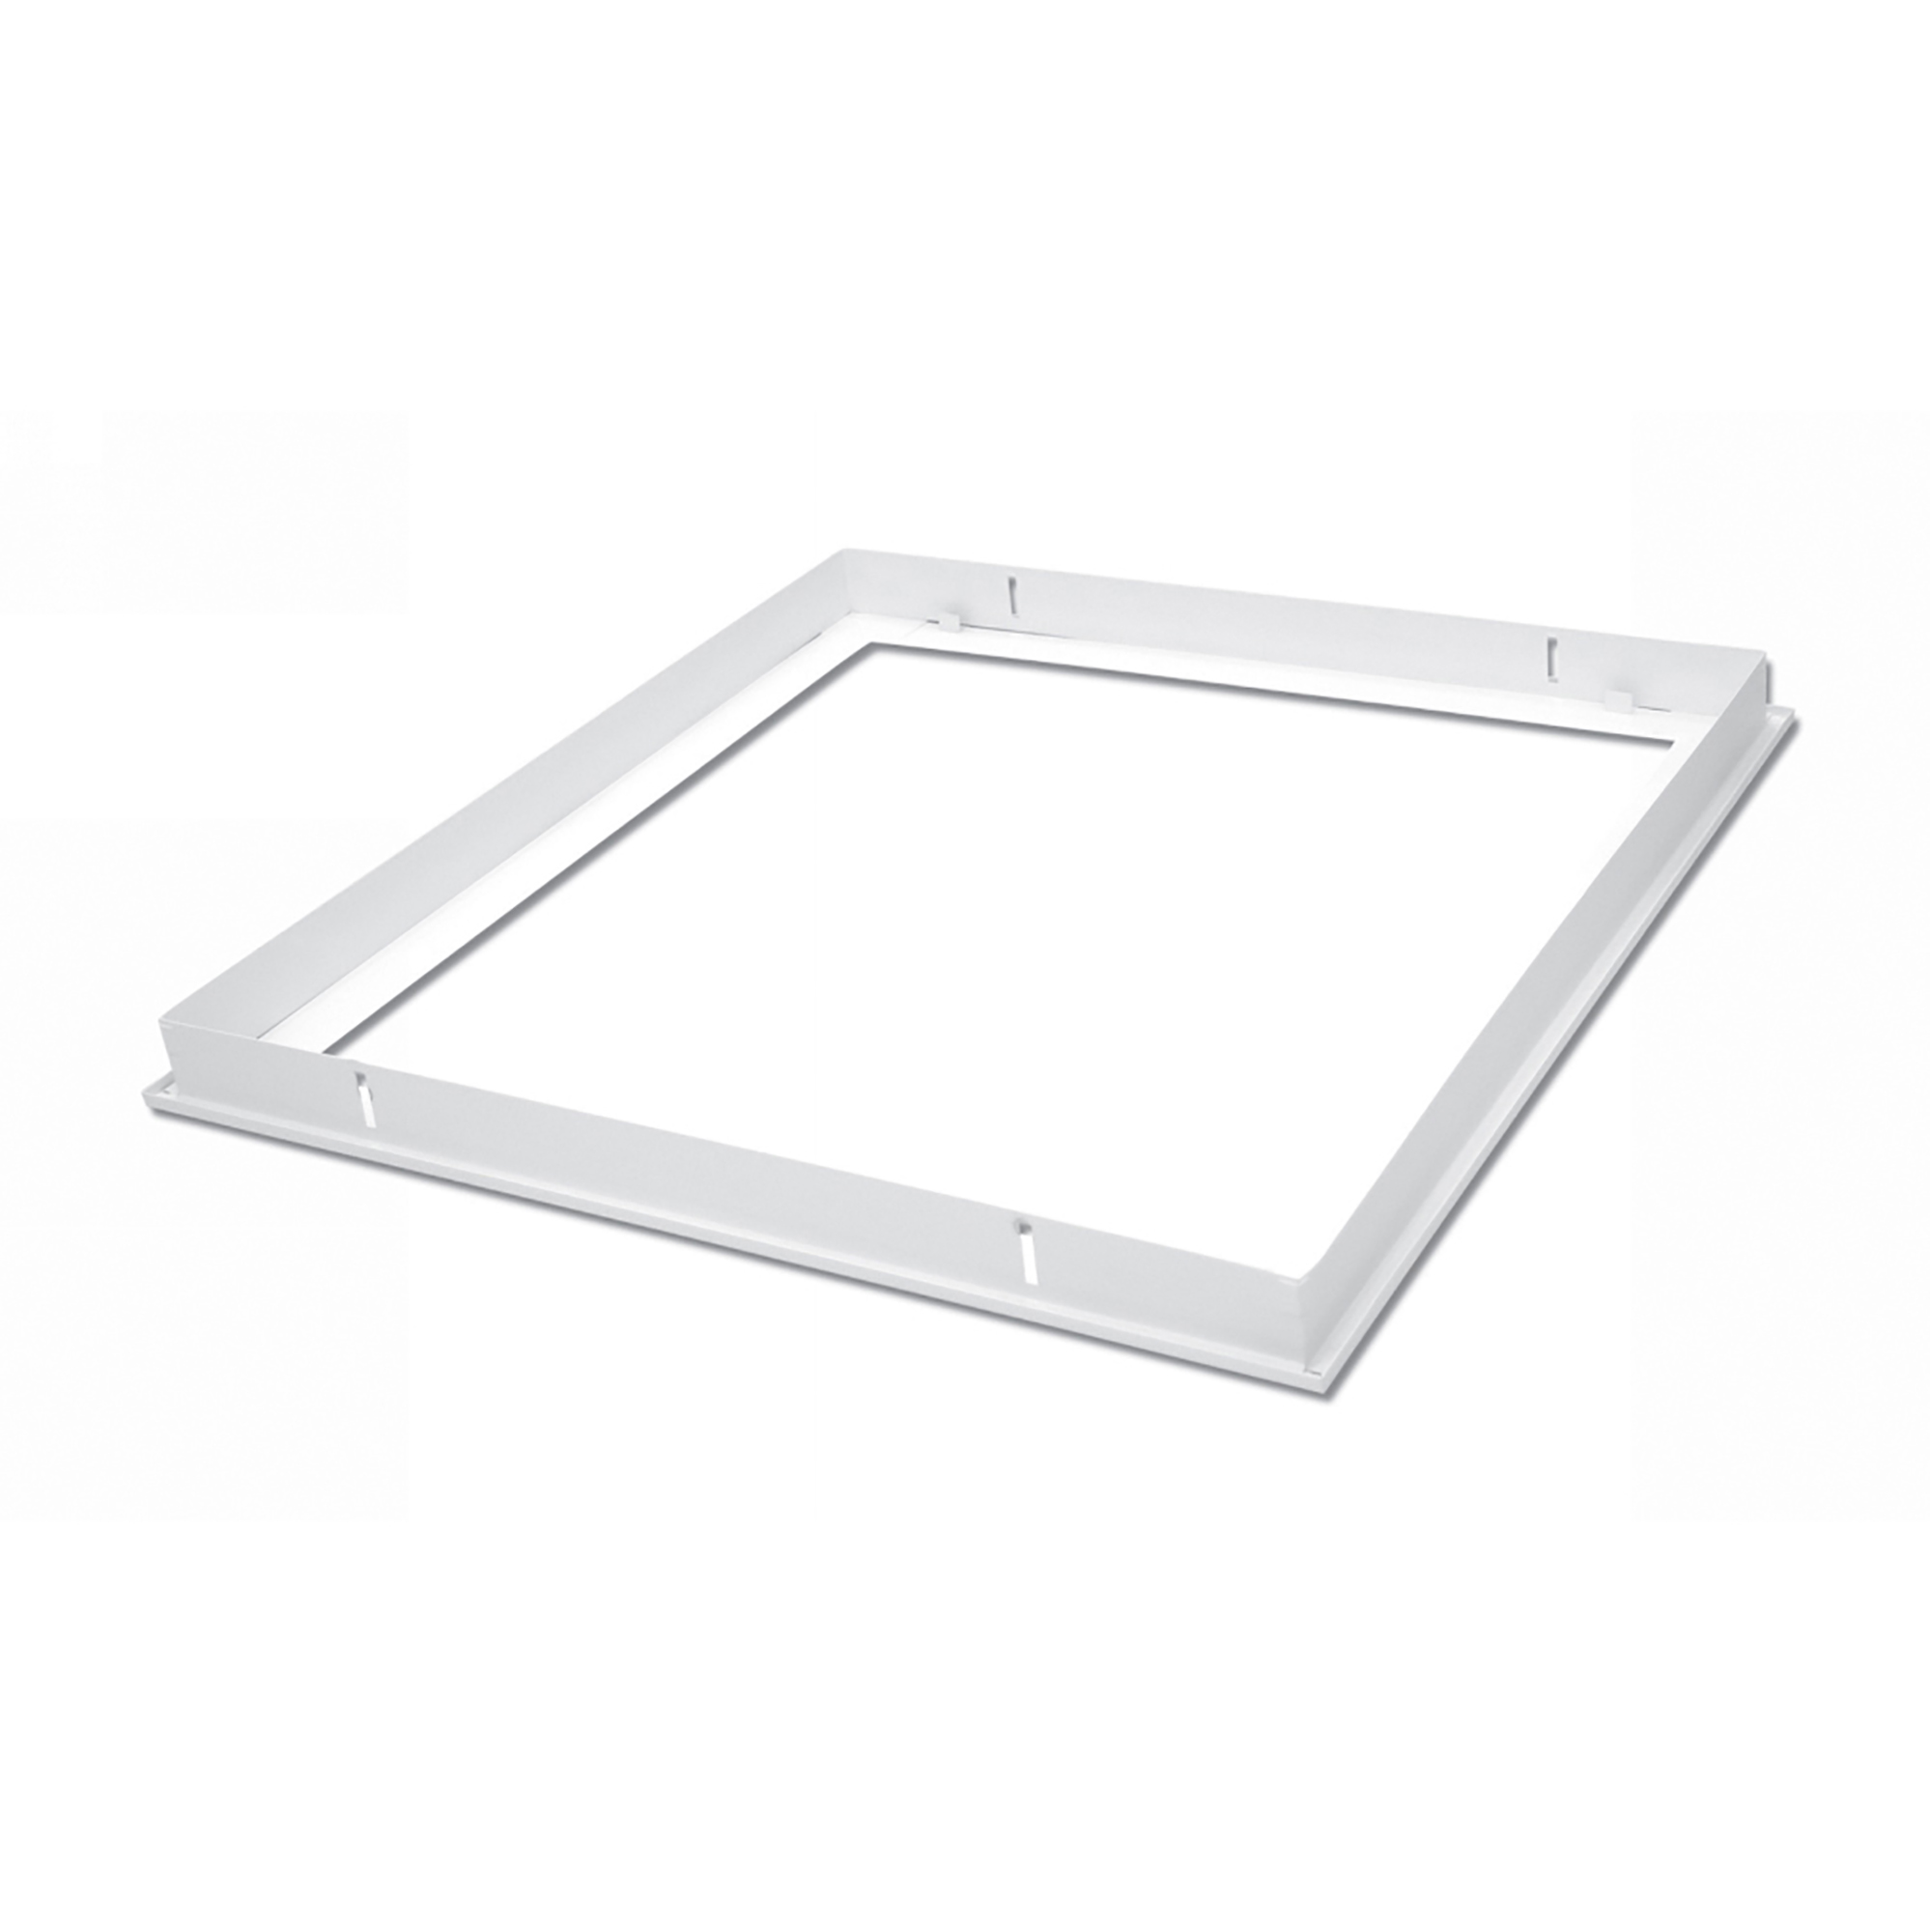 DA240006/TW  Piano 66 Flush Recessed Frame For Plaster Board In Textured White; 645x625x45mm; Cut-Out 625x605mm For Panel; 5yrs Warranty